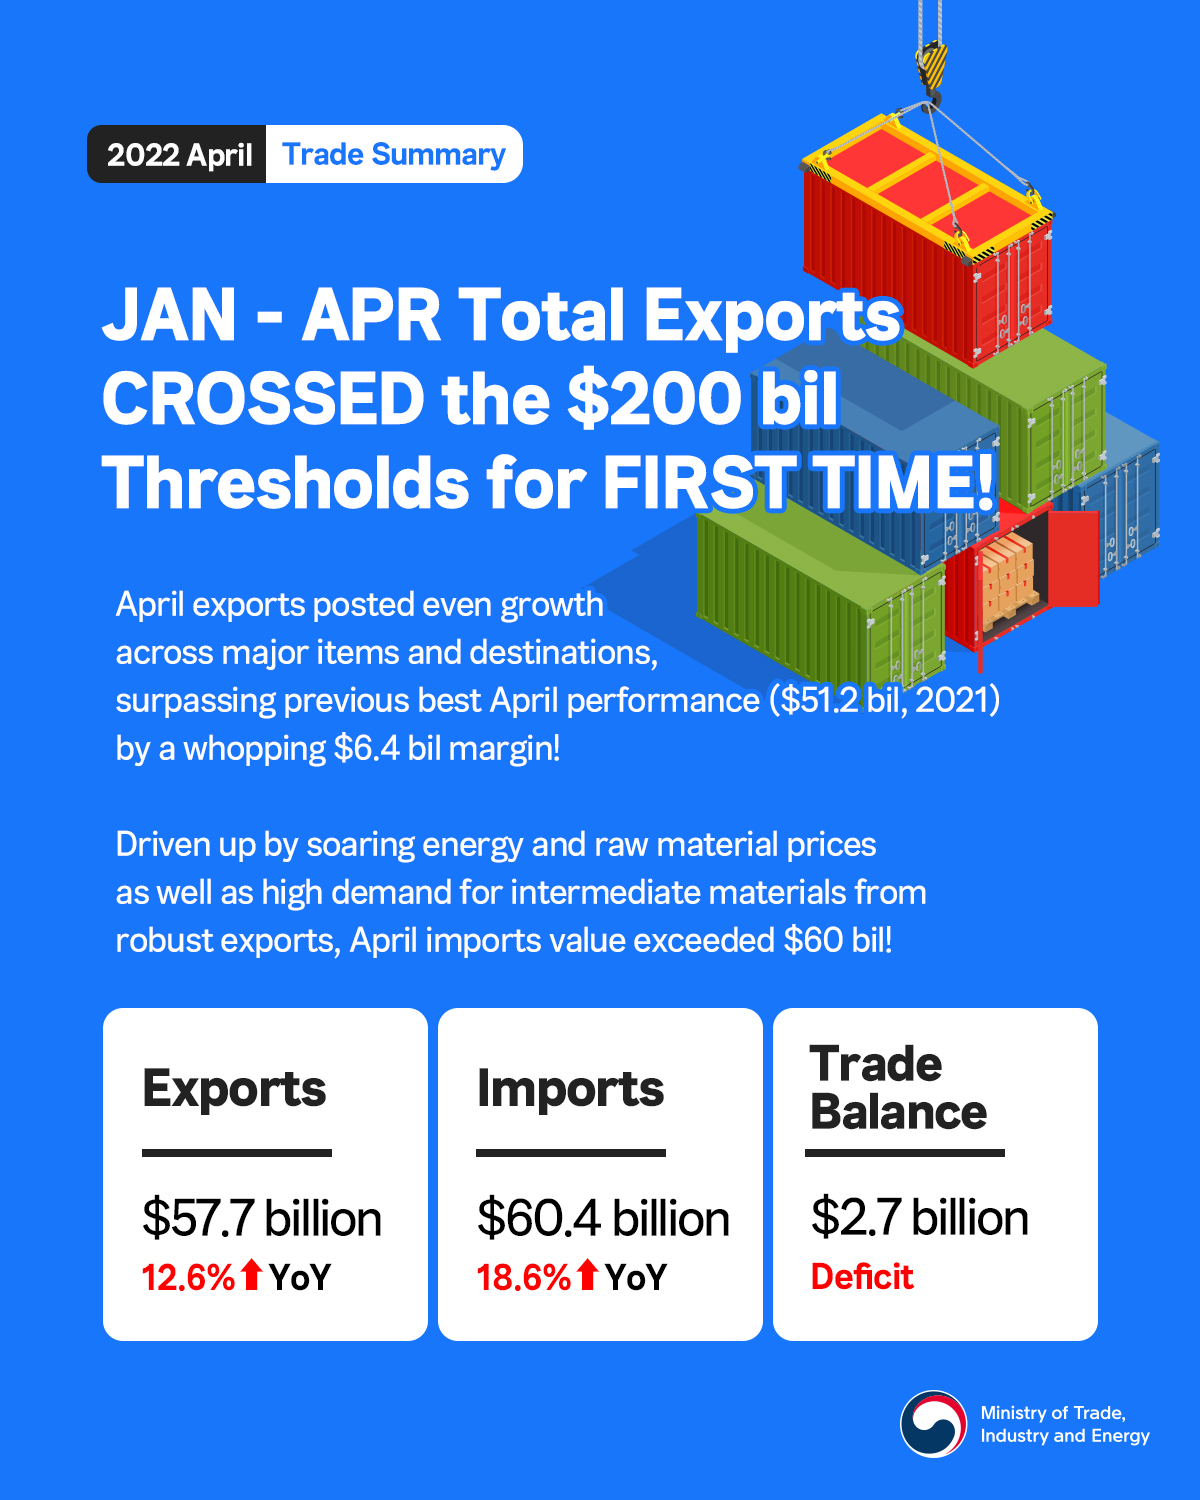 Korea's exports in Q1 2022 surpass $200 billion for first time!